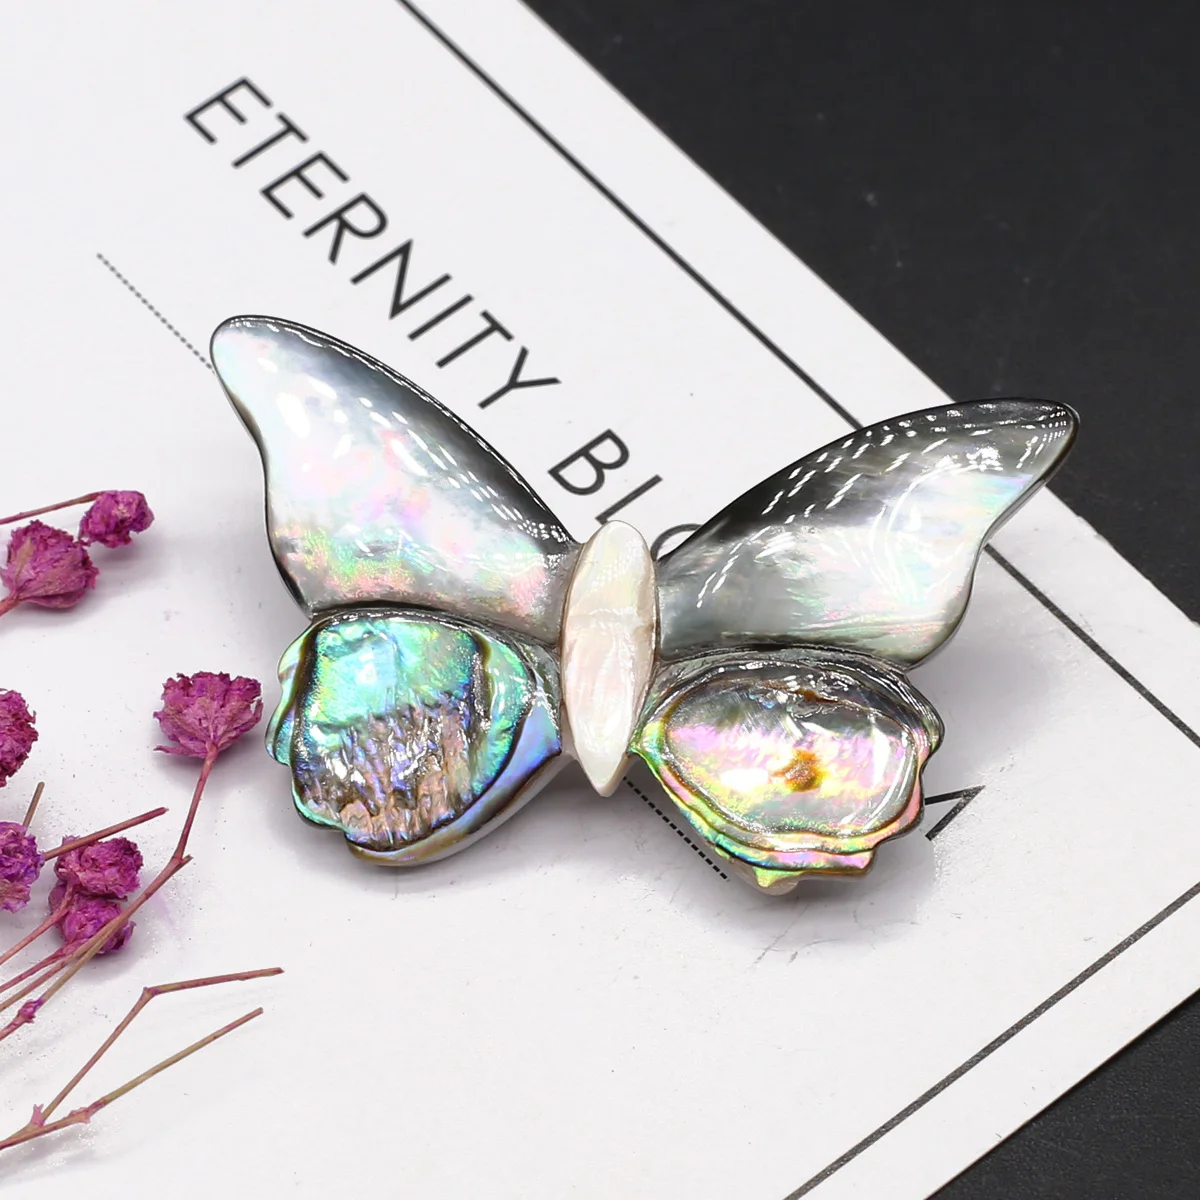 

Butterfly Brooches For Women Charm Abalone Shell Brooch Pins Party Wedding Gifts Clothing Accessories Jewelry Gift 60x40mm